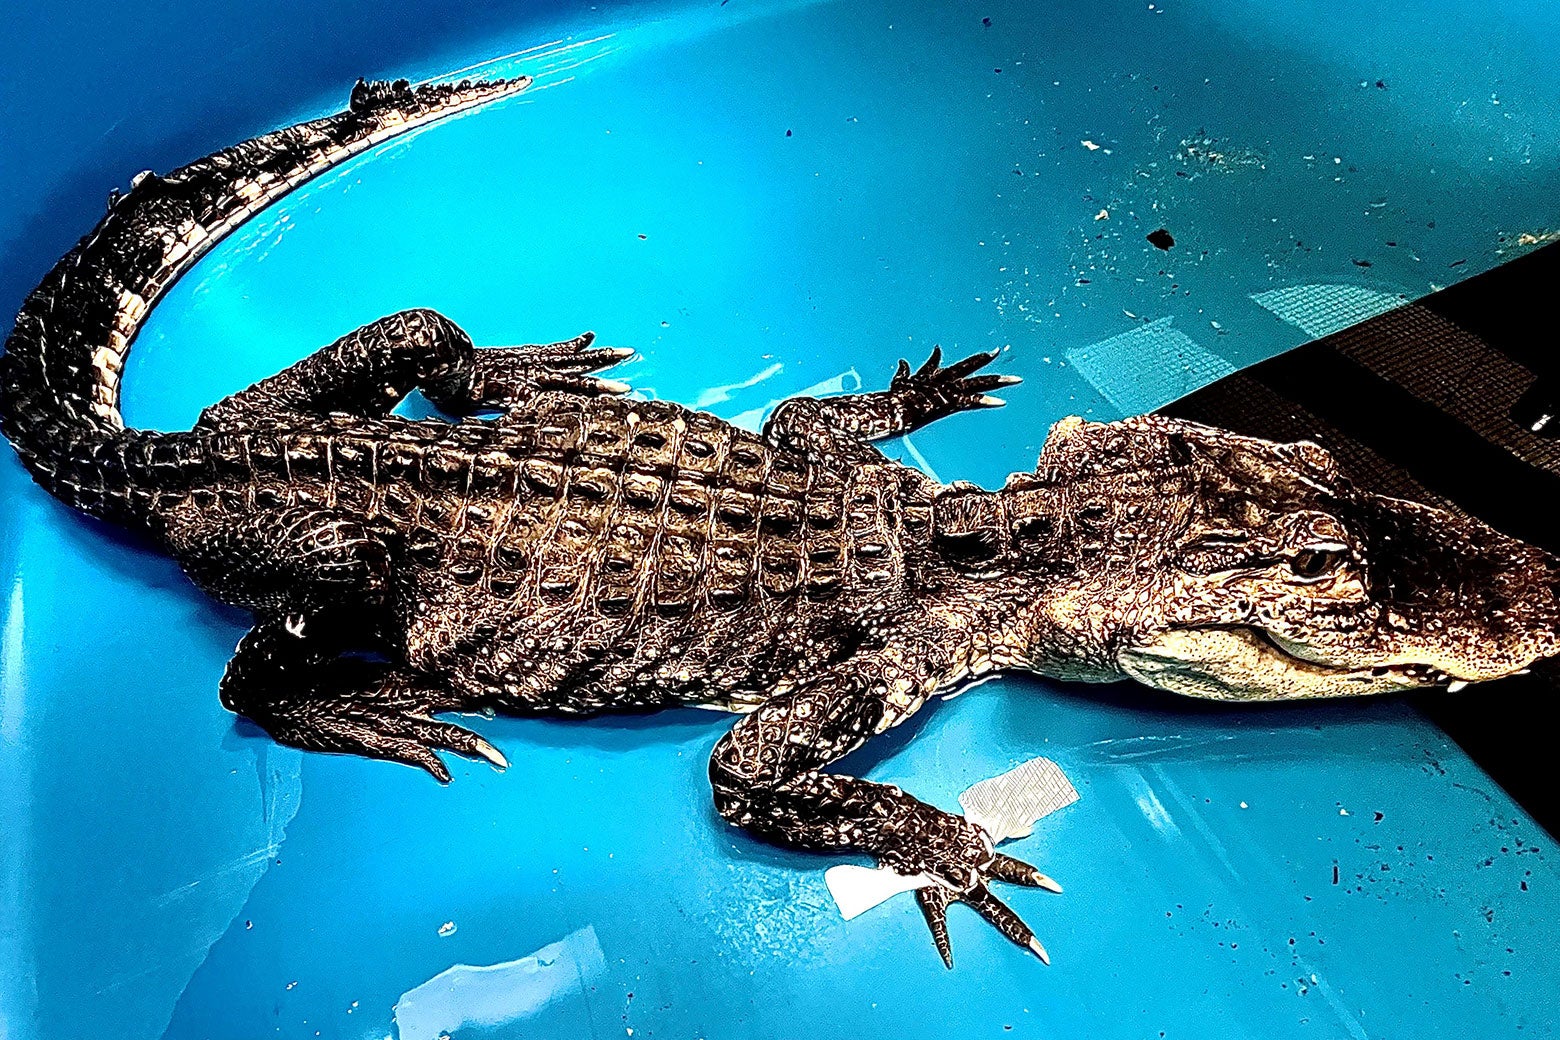 What’s Going on With the Prospect Park Alligator?